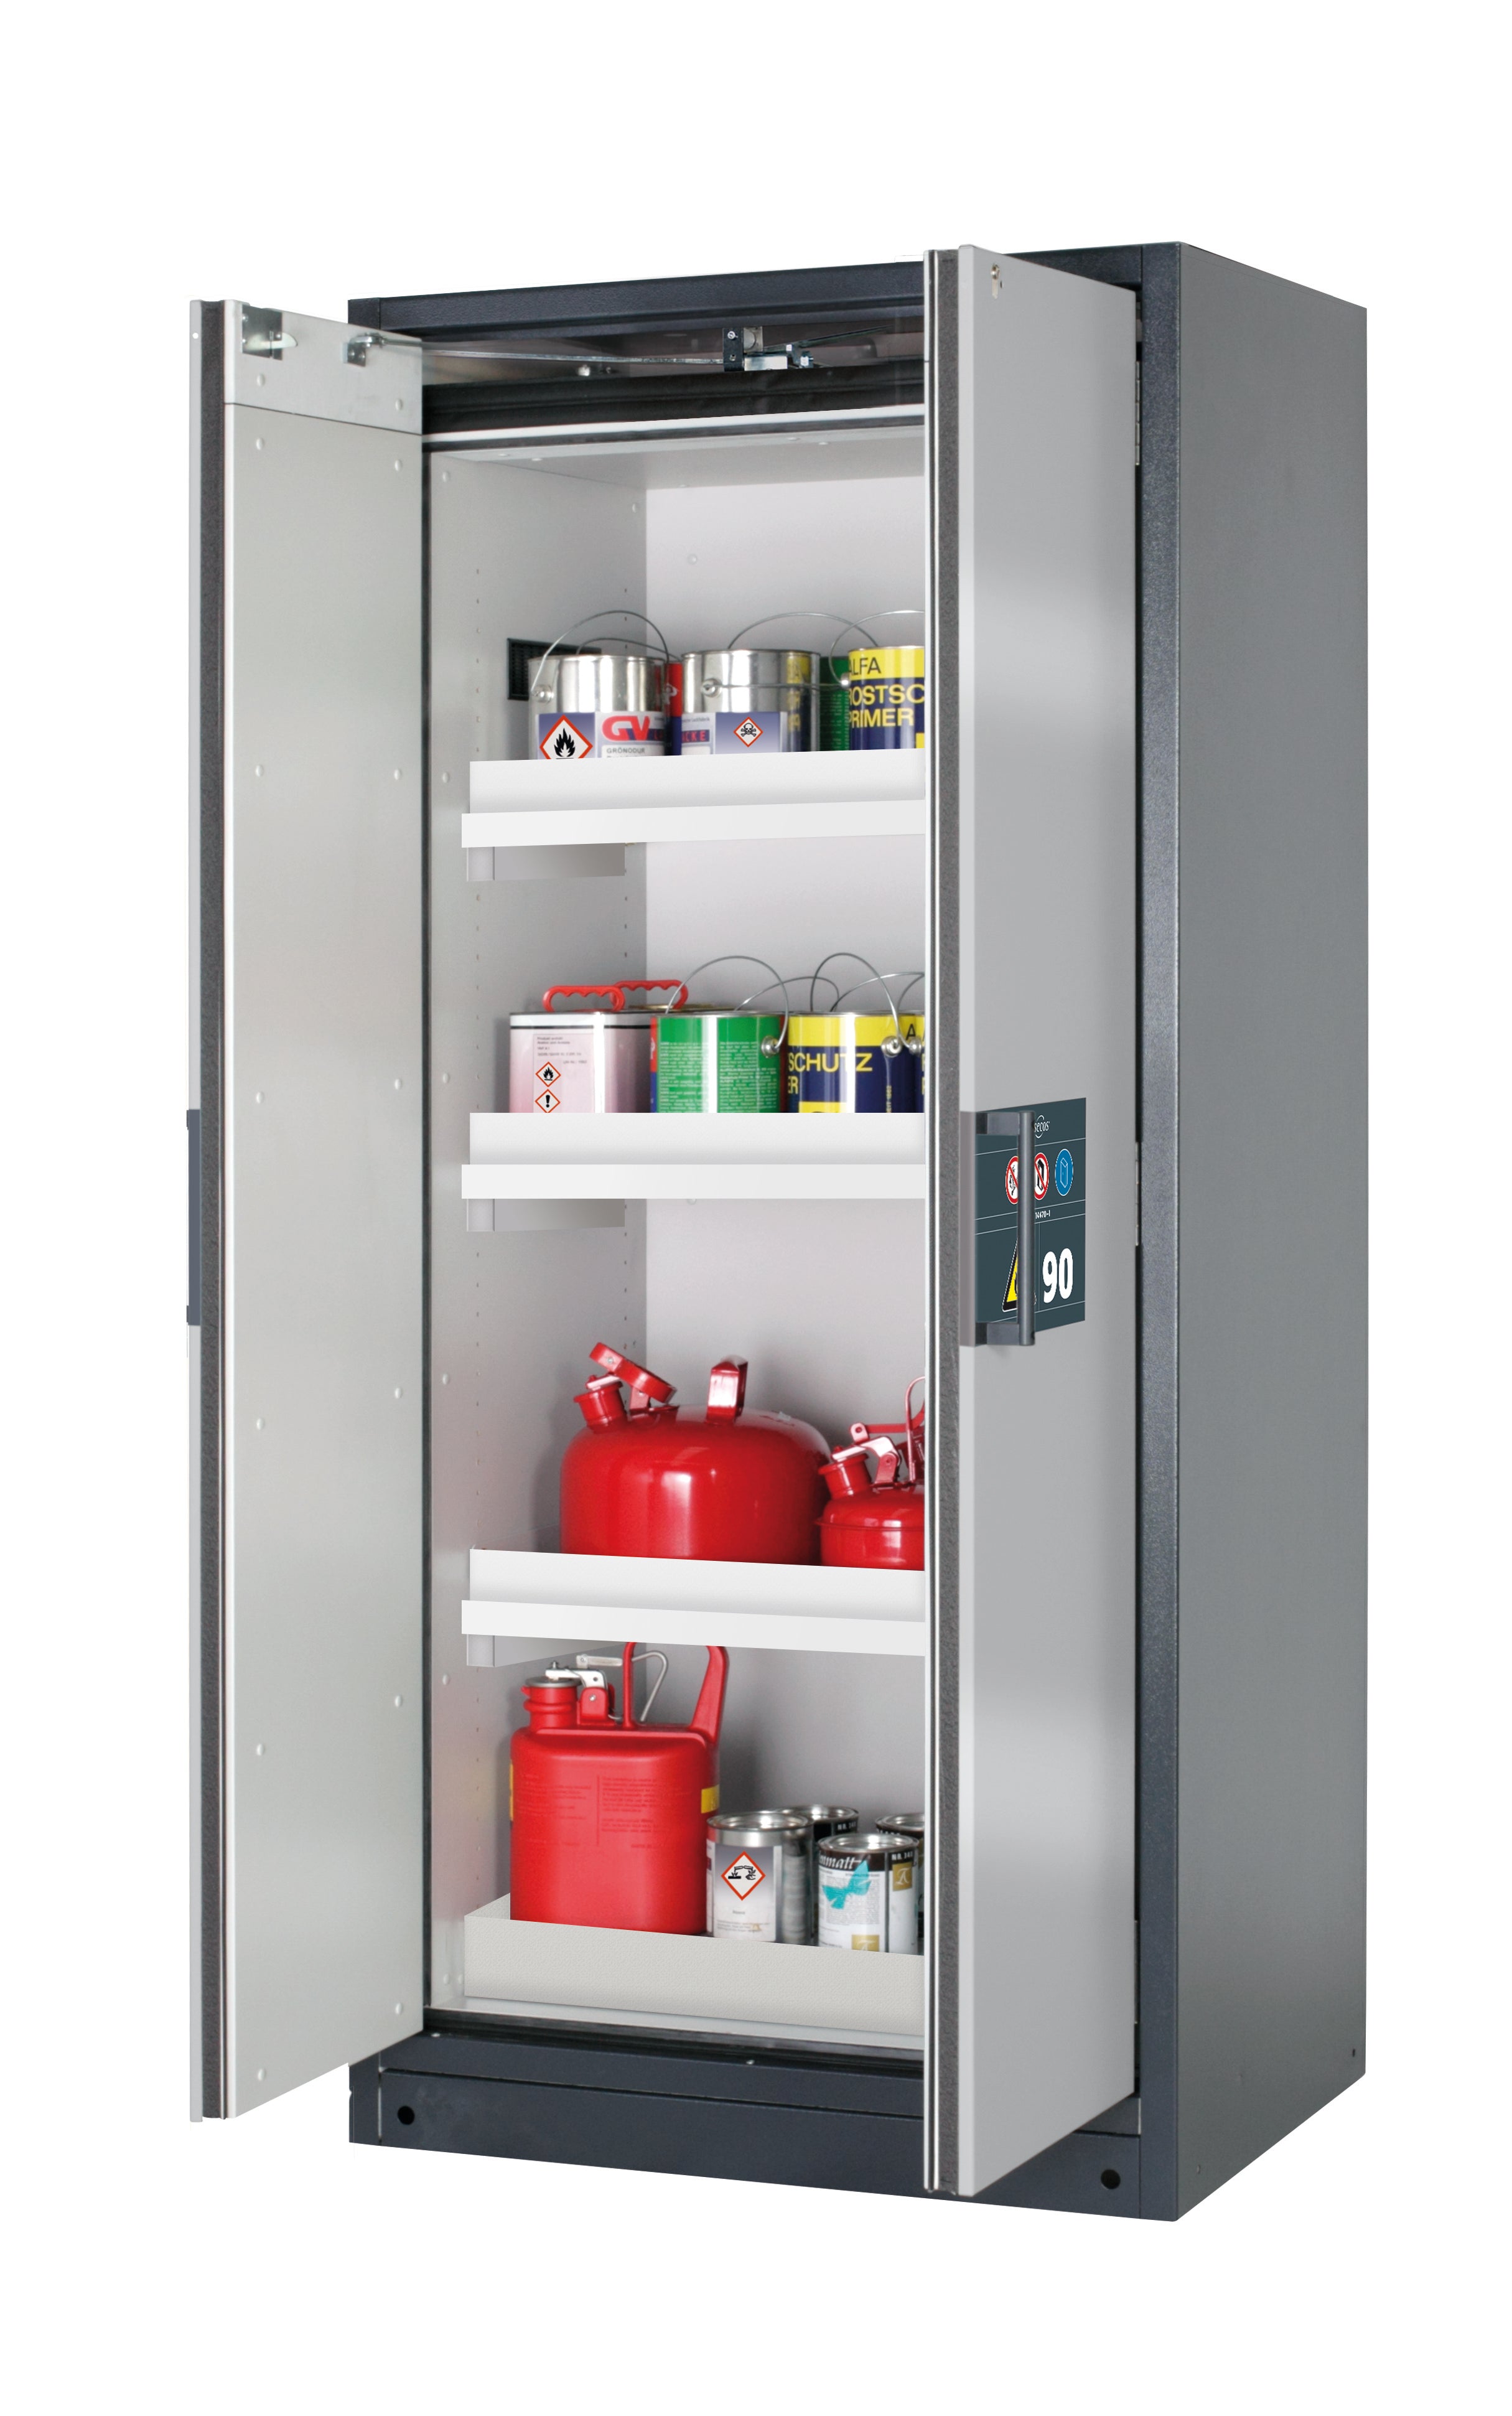 Type 90 safety storage cabinet Q-PEGASUS-90 model Q90.195.090.WDAC in asecos silver with 3x tray shelf (standard) (polypropylene),